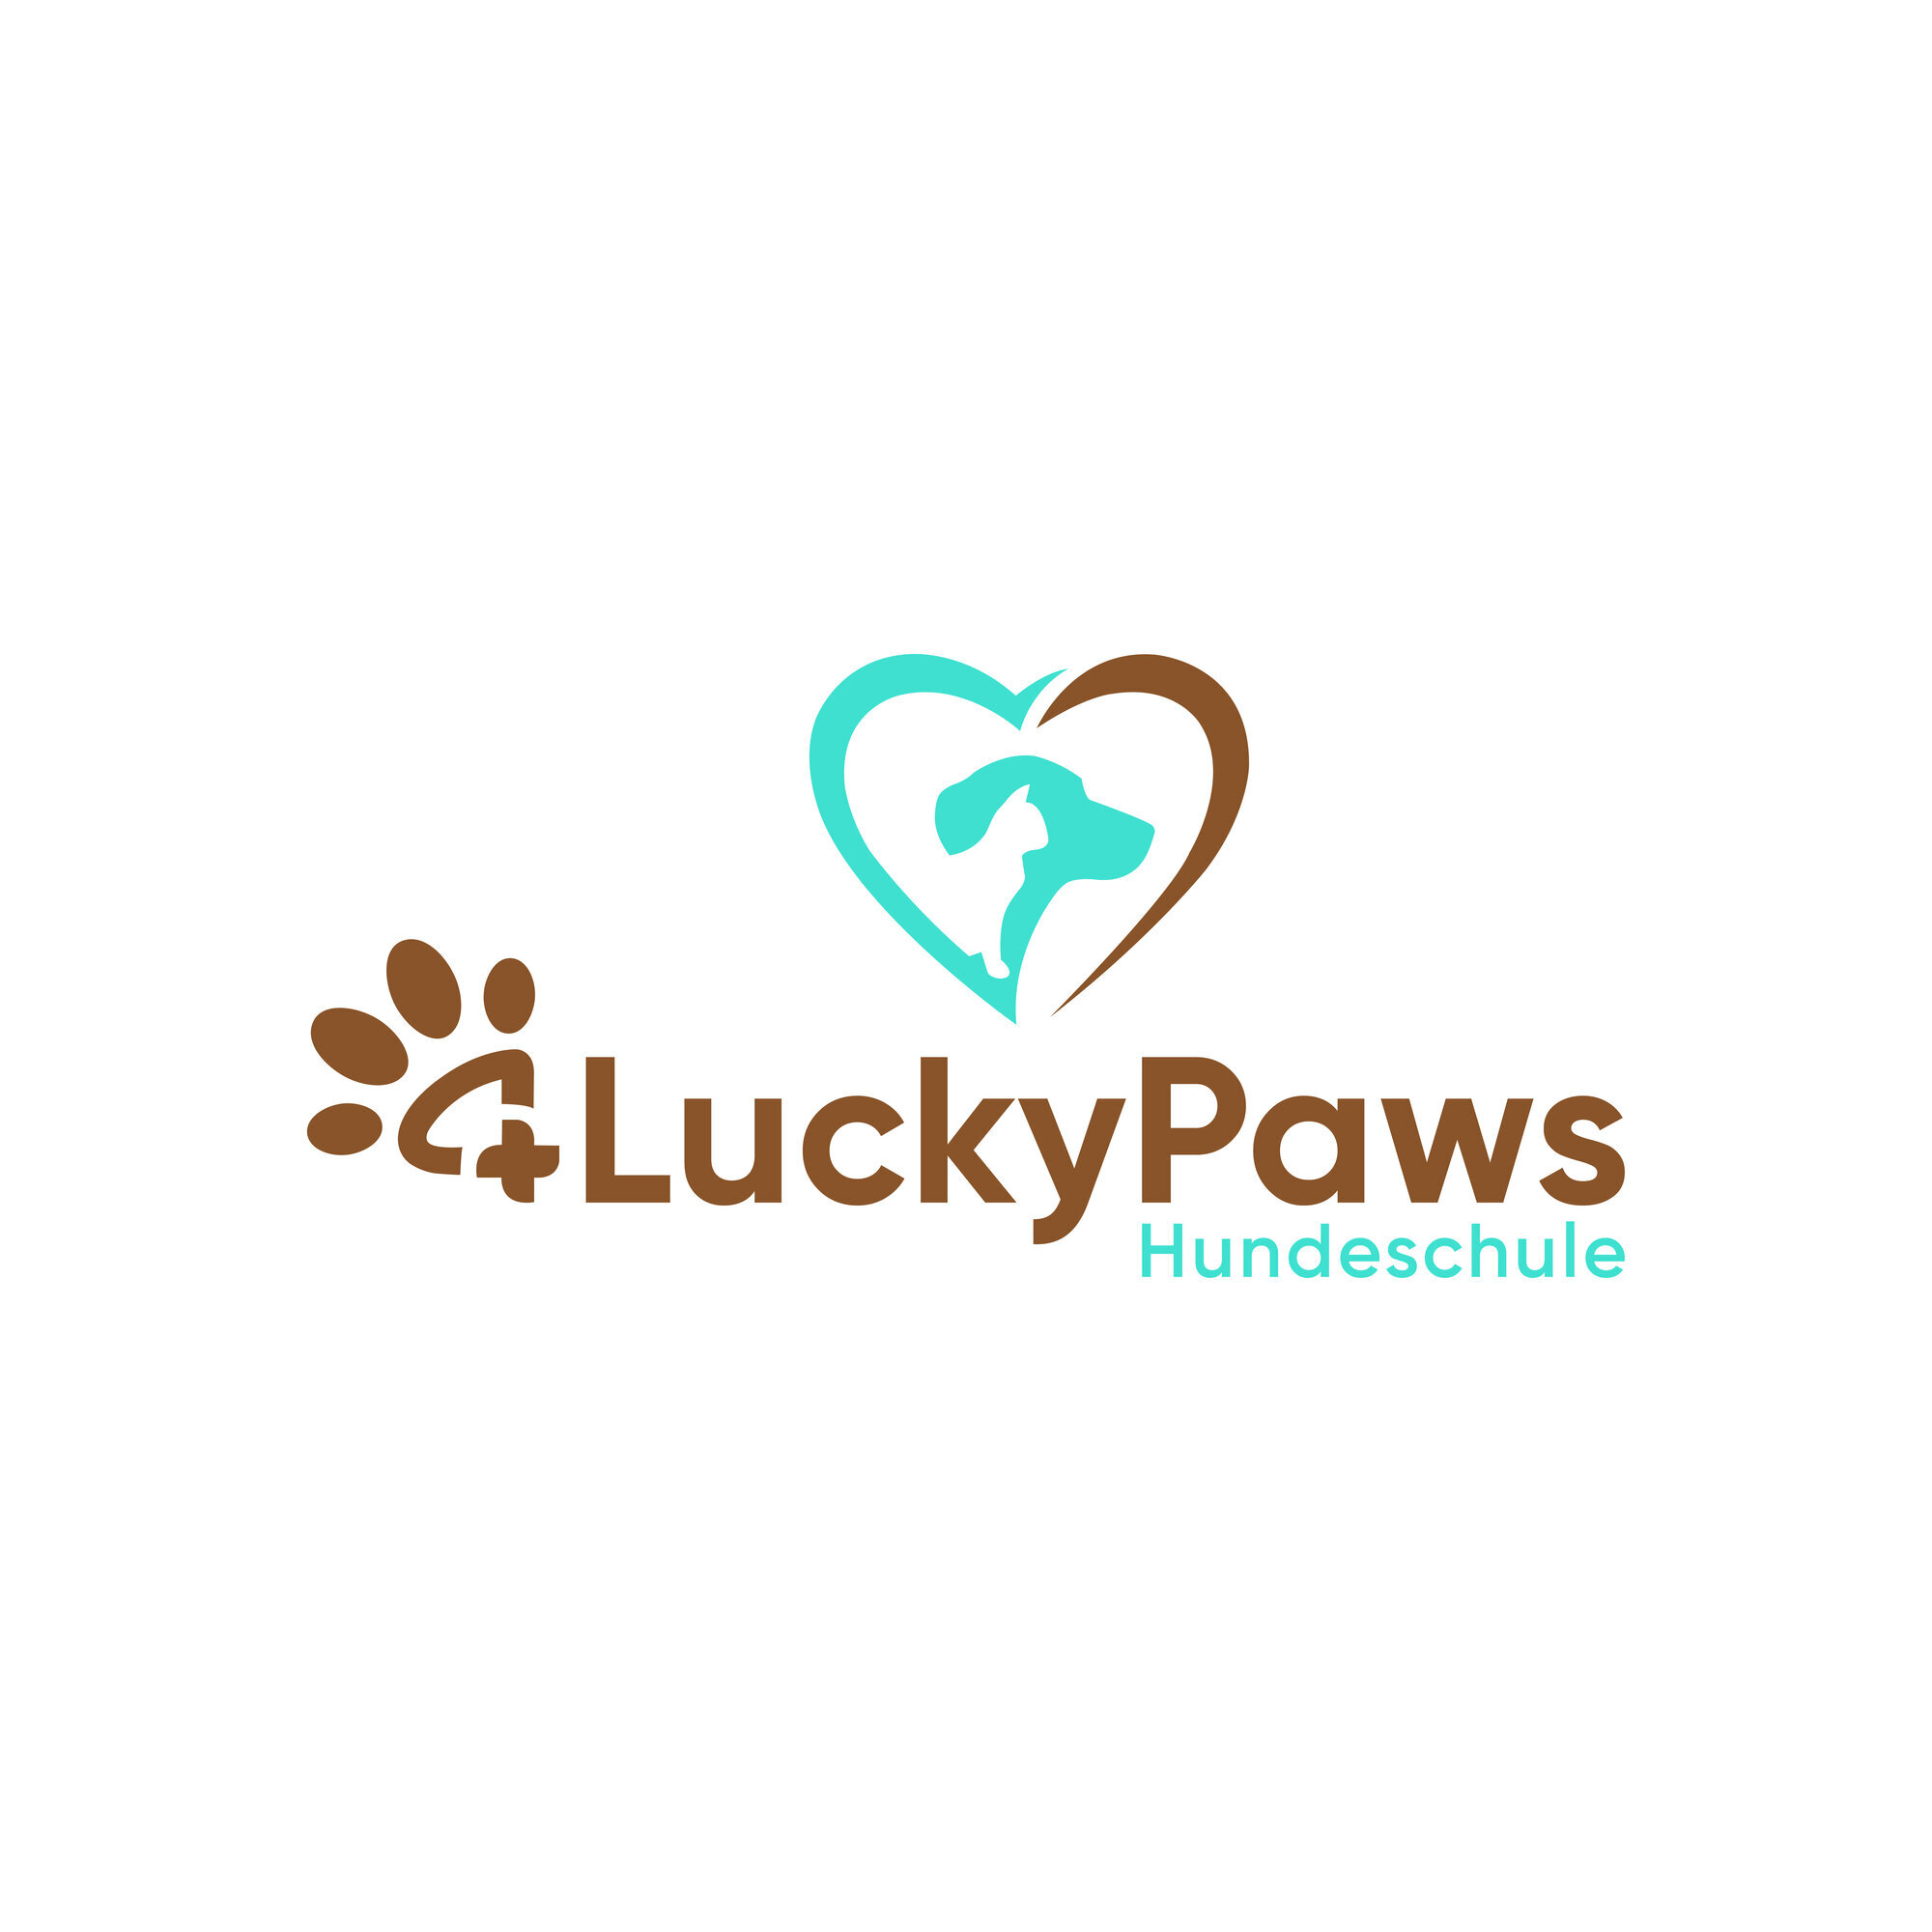 Bild 11 Mobile Hundeschule 4LuckyPaws in Uffing am Staffelsee